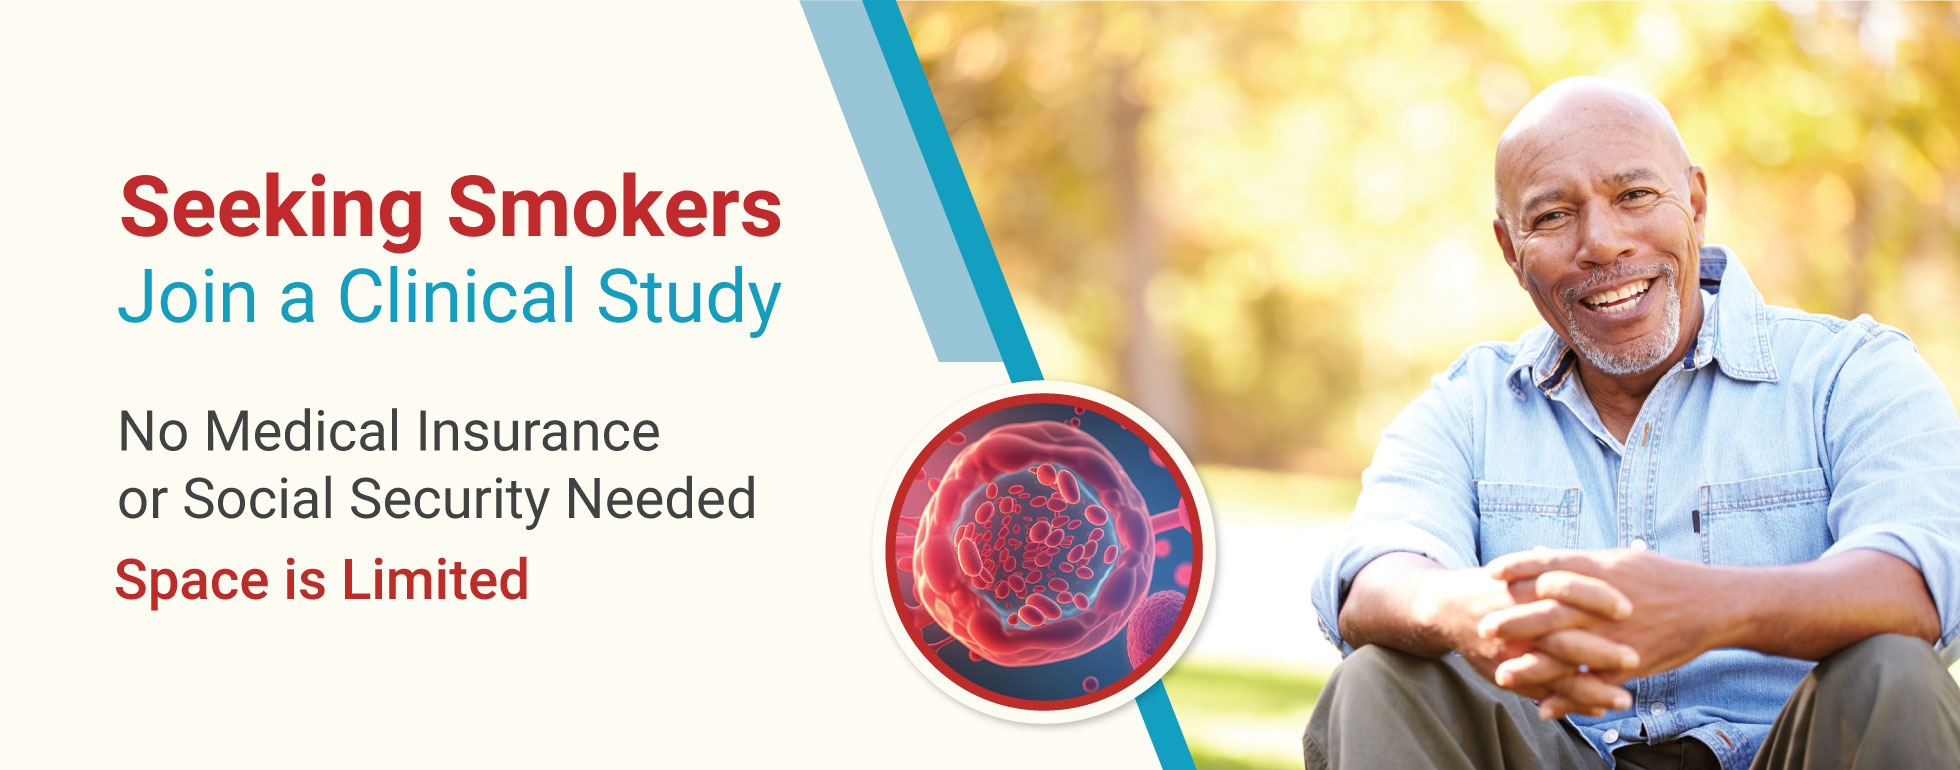 paid research studies for smokers